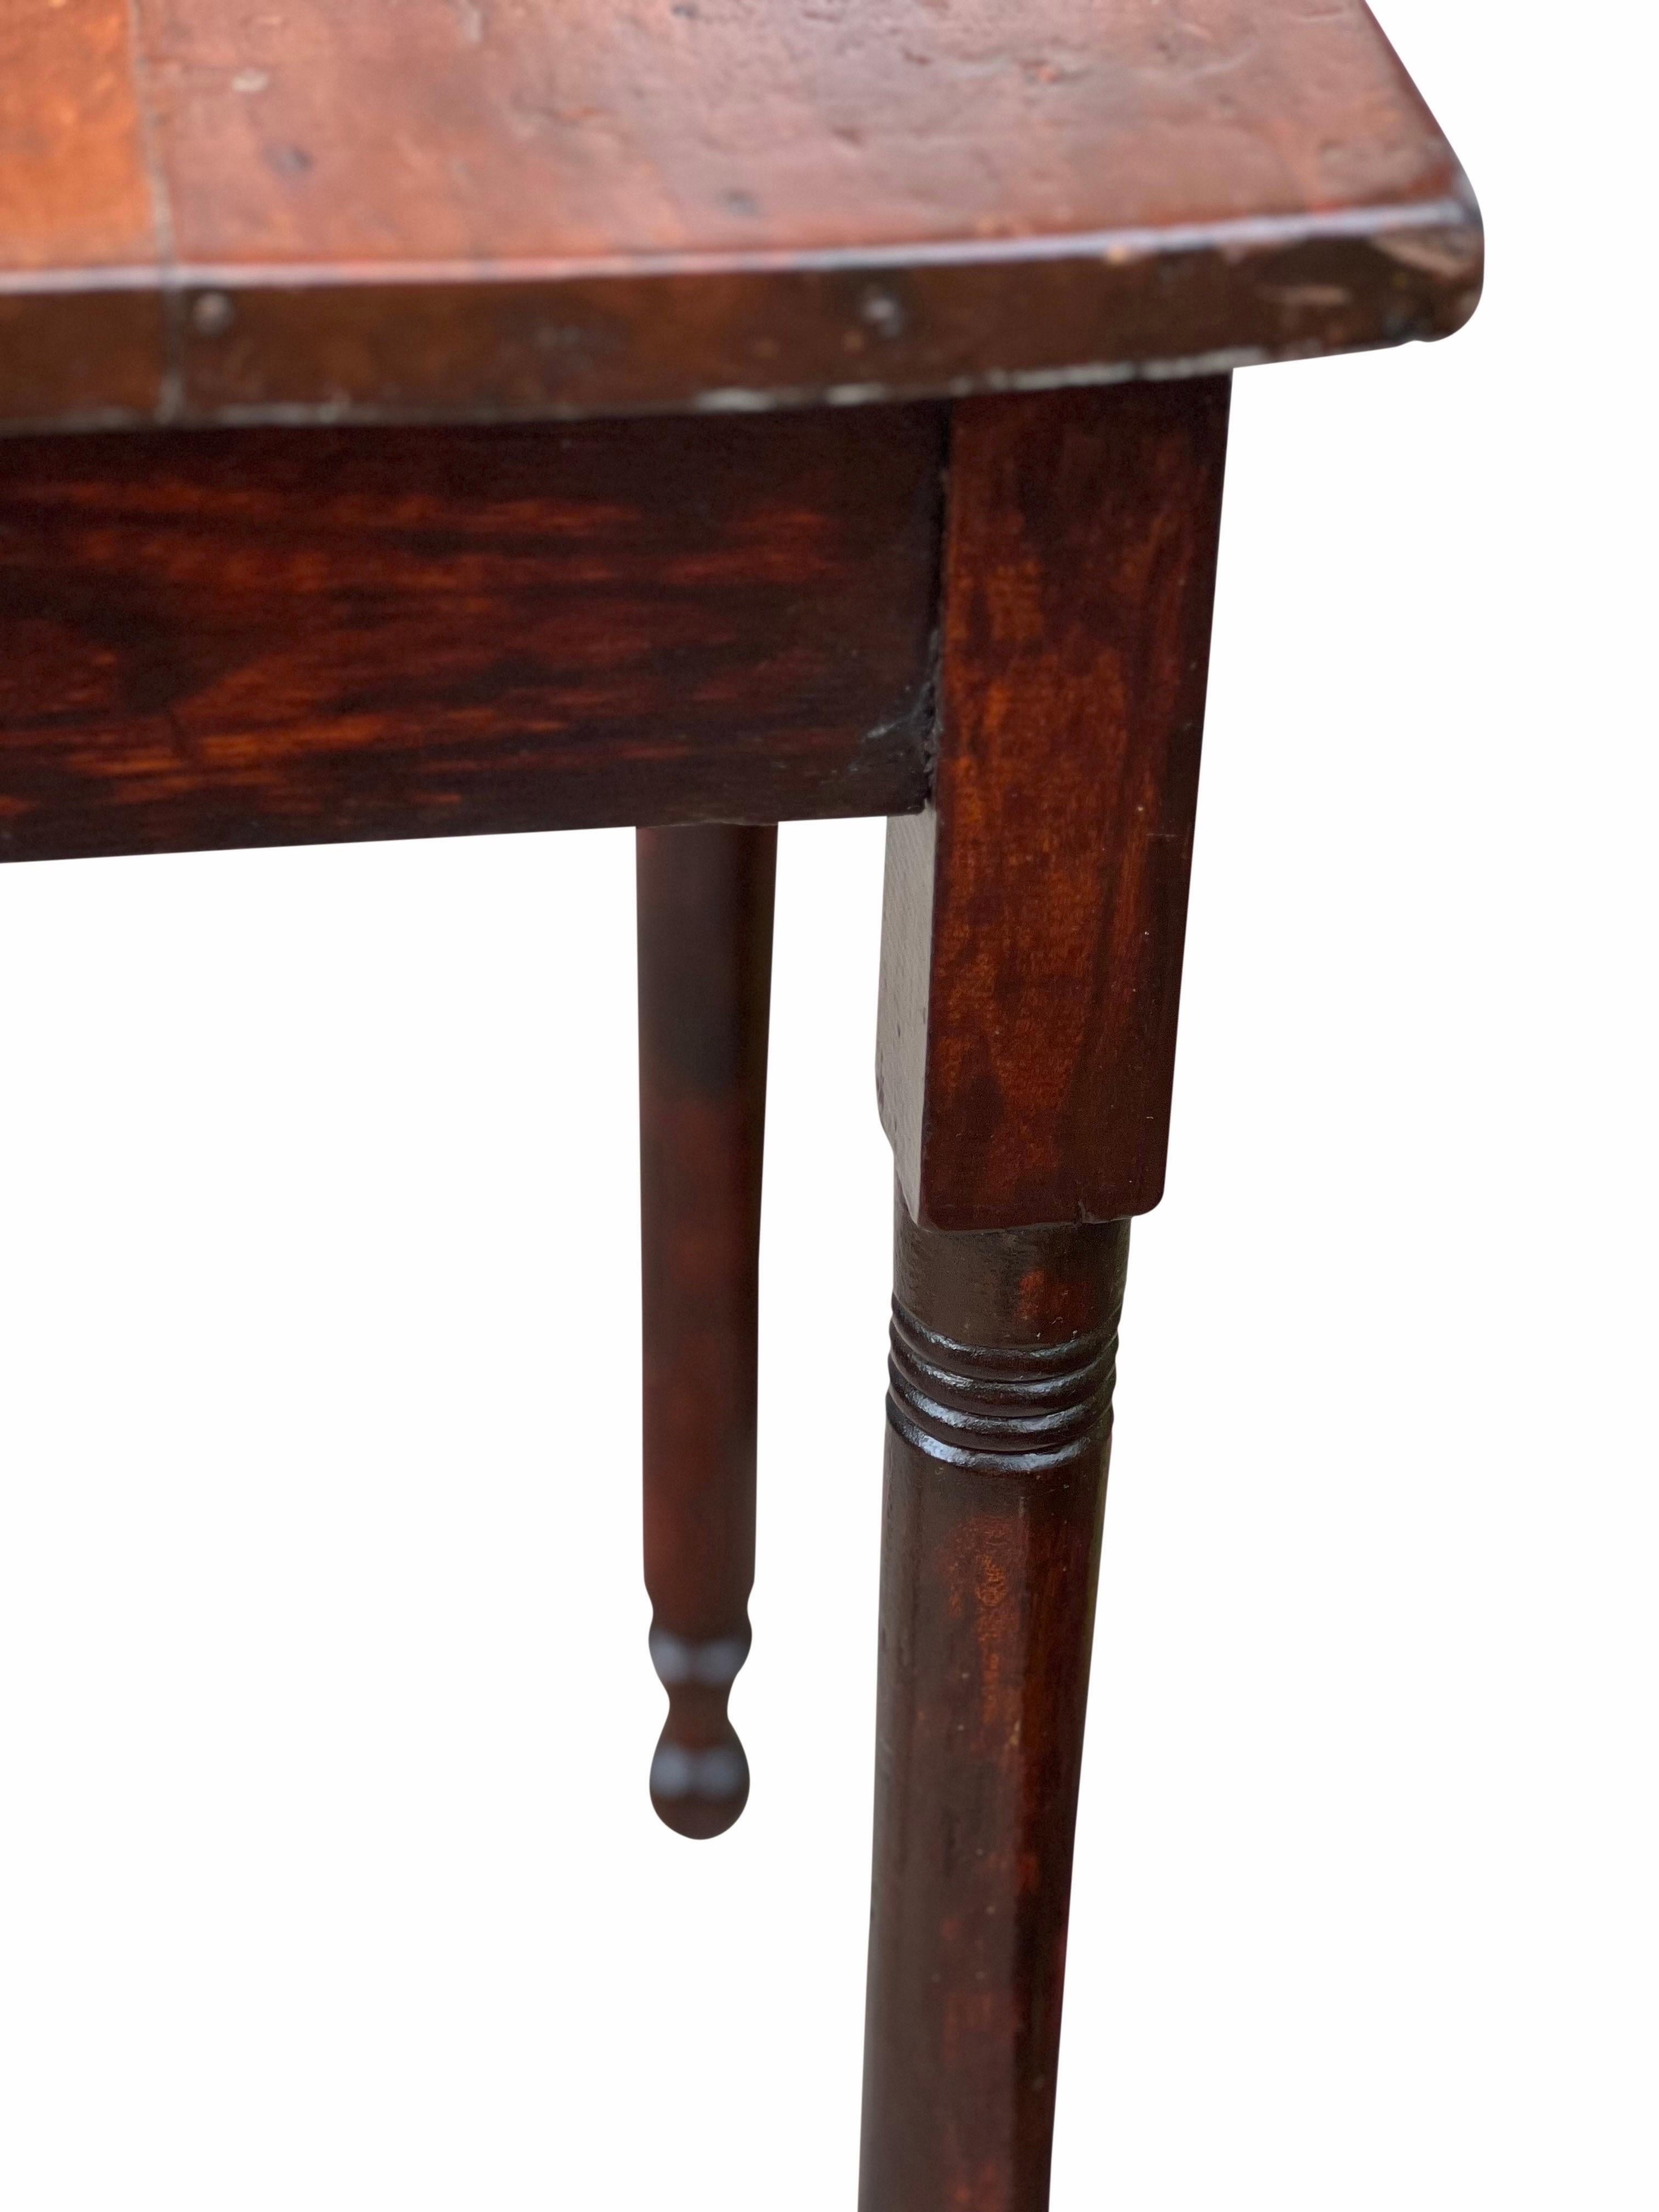 19th Century Mahogany Small Work Table, Side Table or Plant Stand In Good Condition For Sale In Doylestown, PA